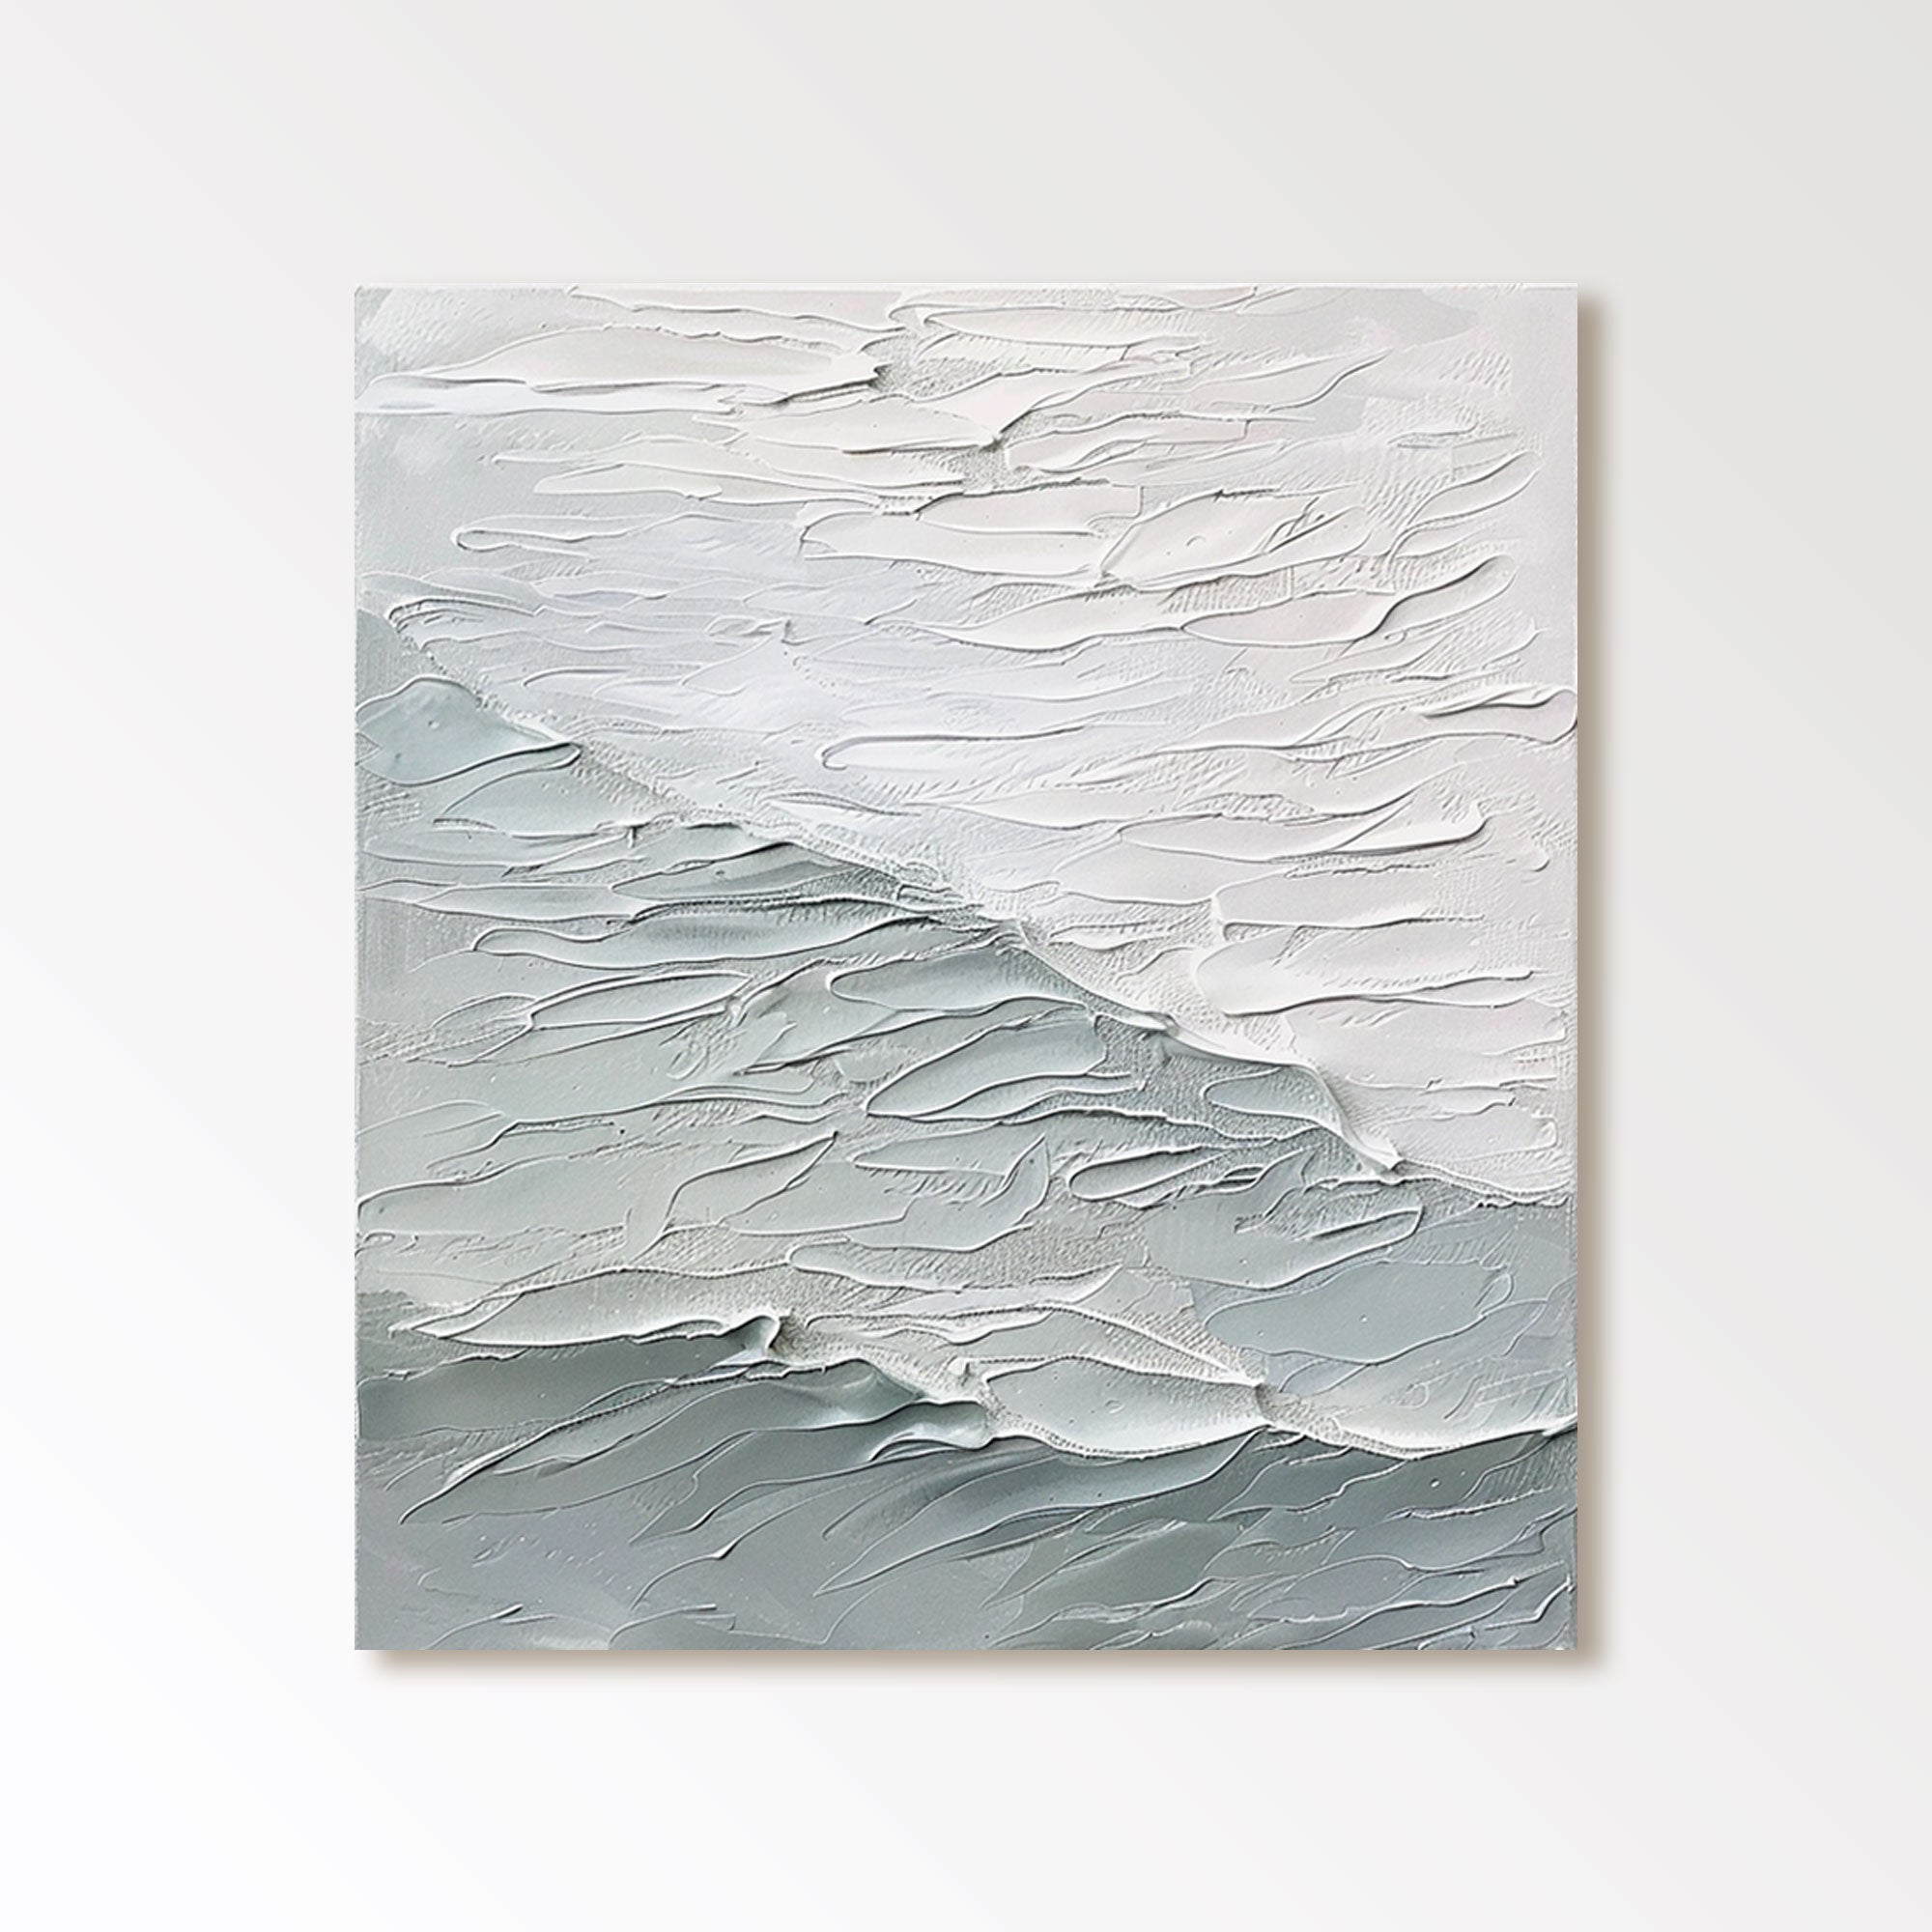 Plaster Painting "Ethereal Waves of Serenity"